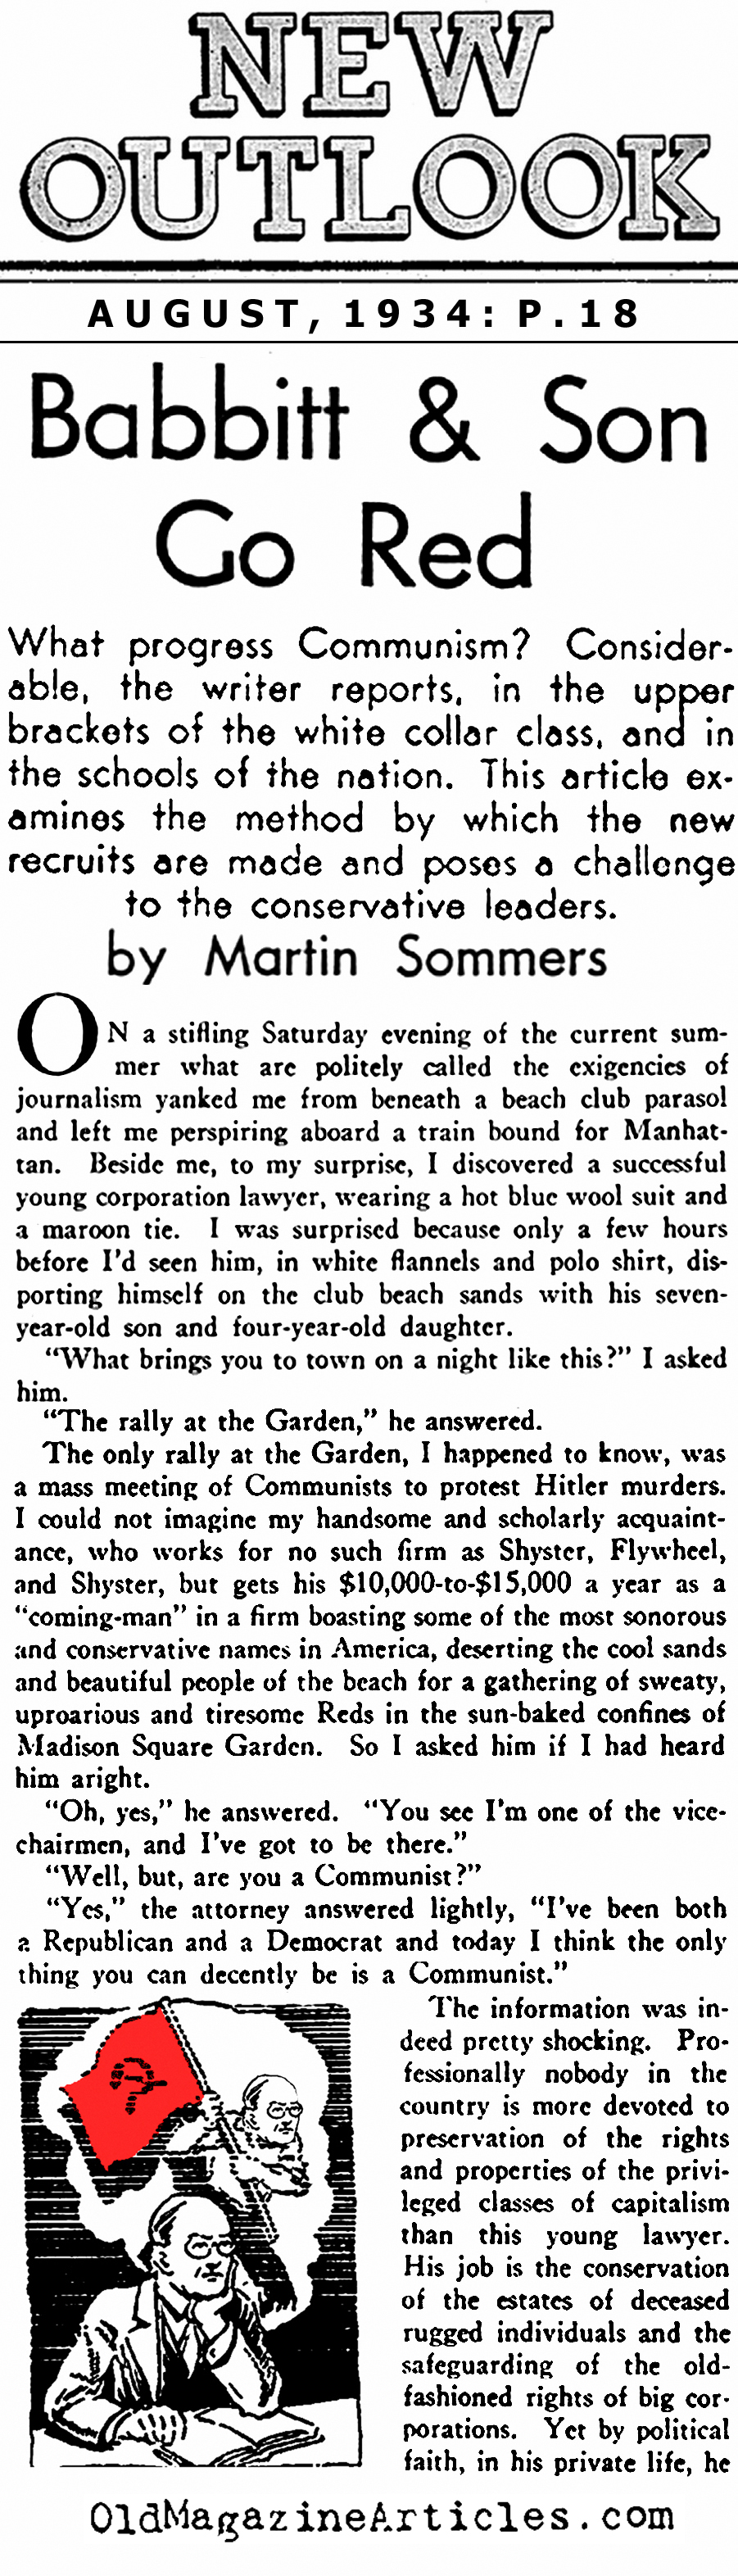 Unlikely Communists & Red Teachers (New Outlook Magazine, 1934)